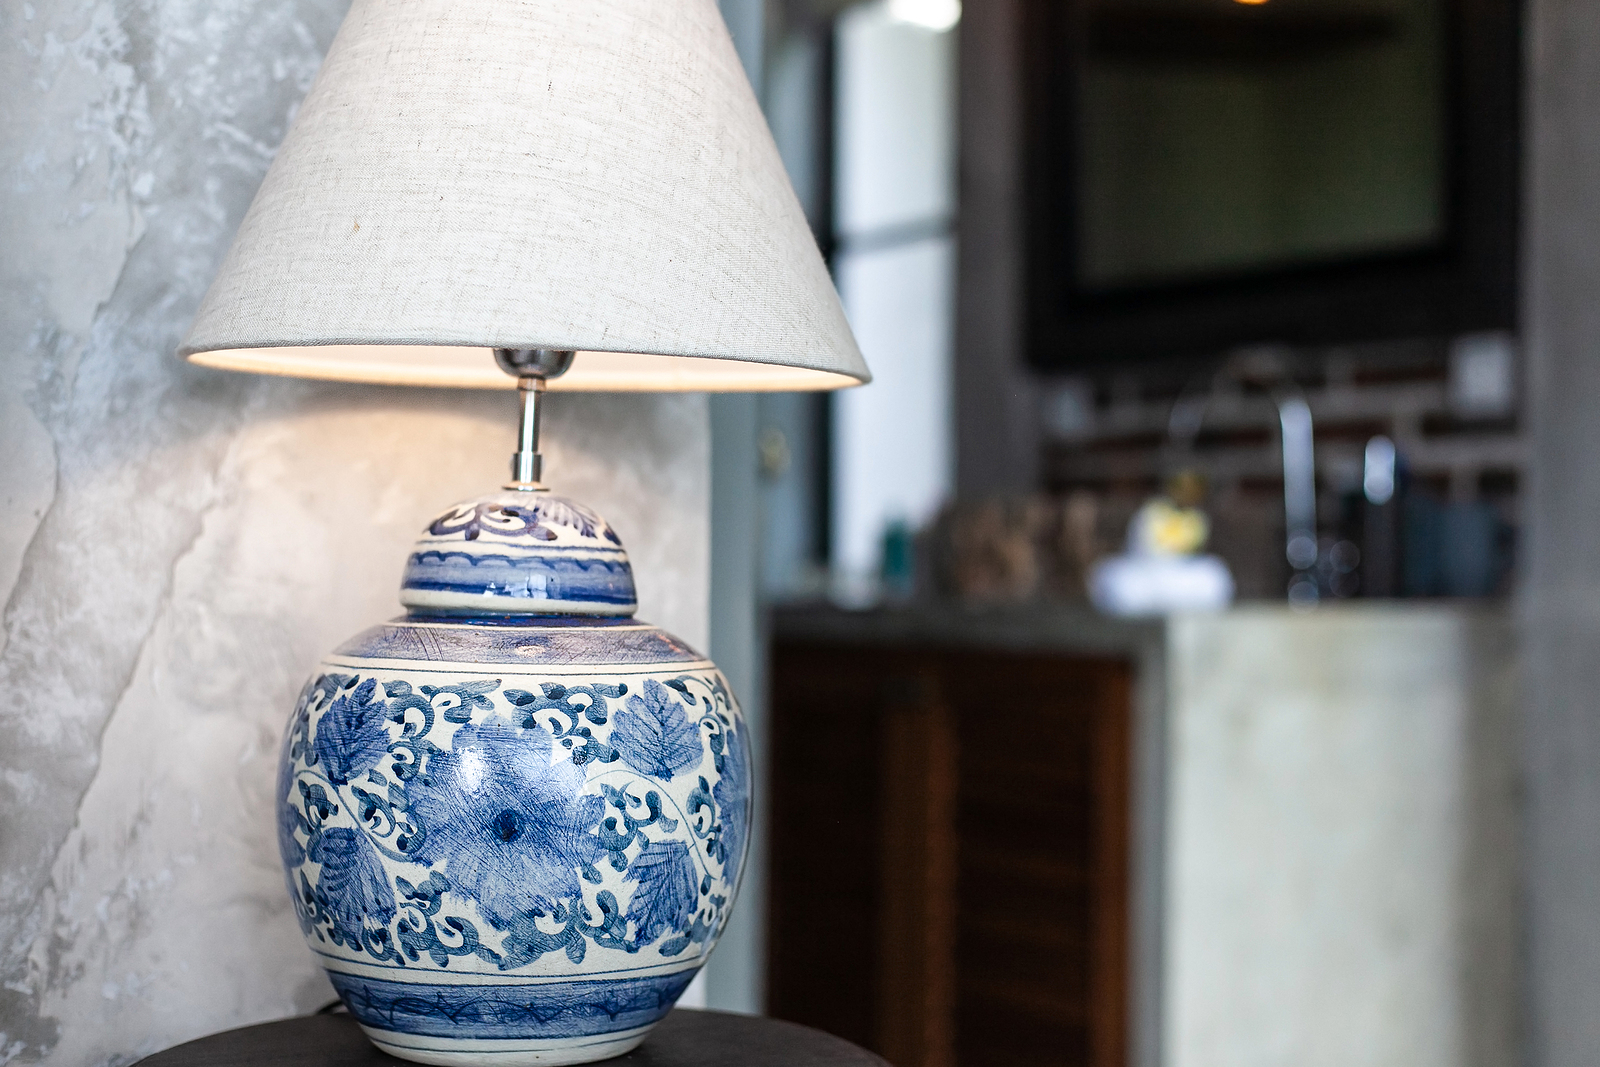 A Large Ceramic Lamp With Blue Patterns On A White Background